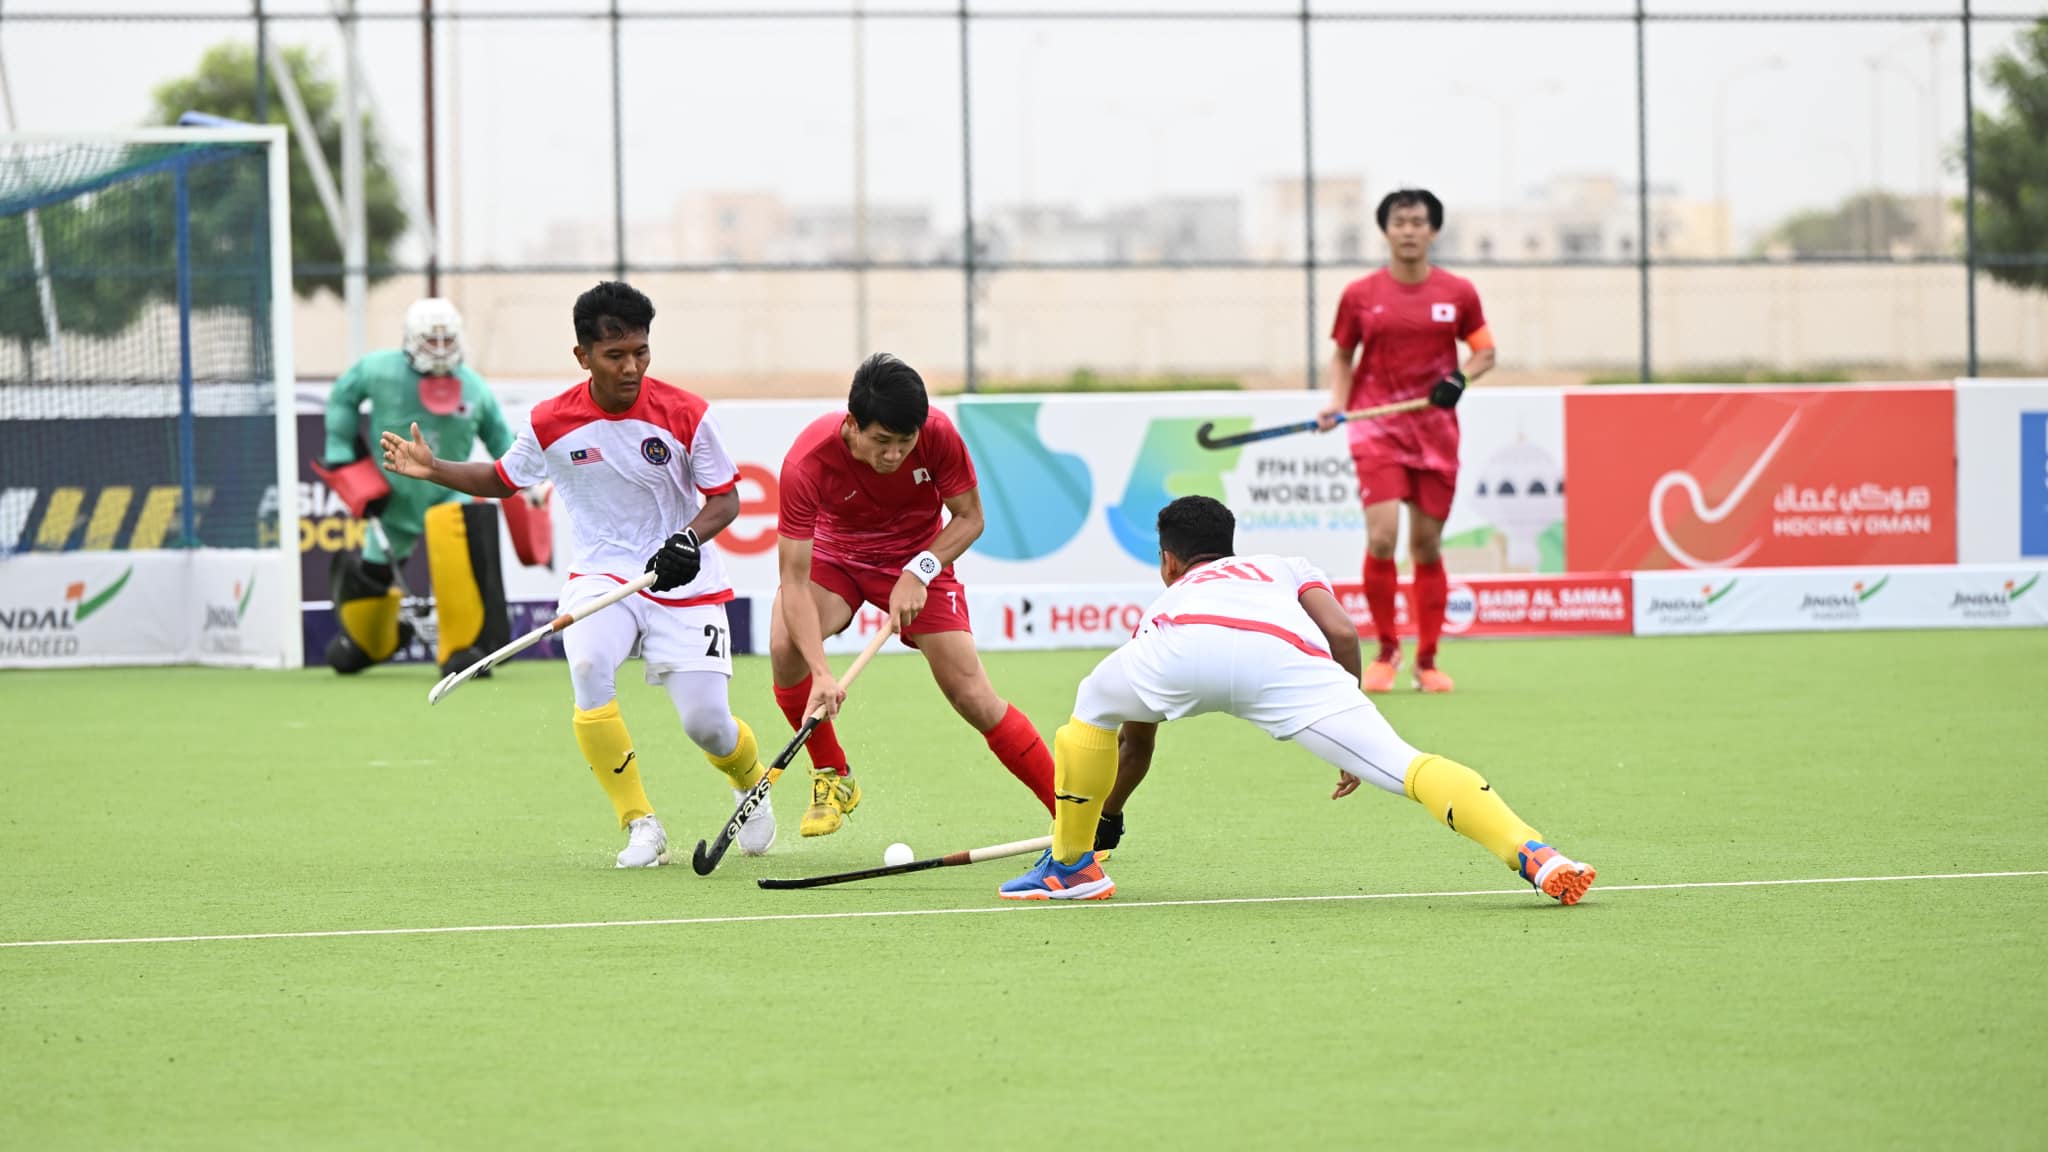 MHC requests increased funding to elevate Malaysian hockey